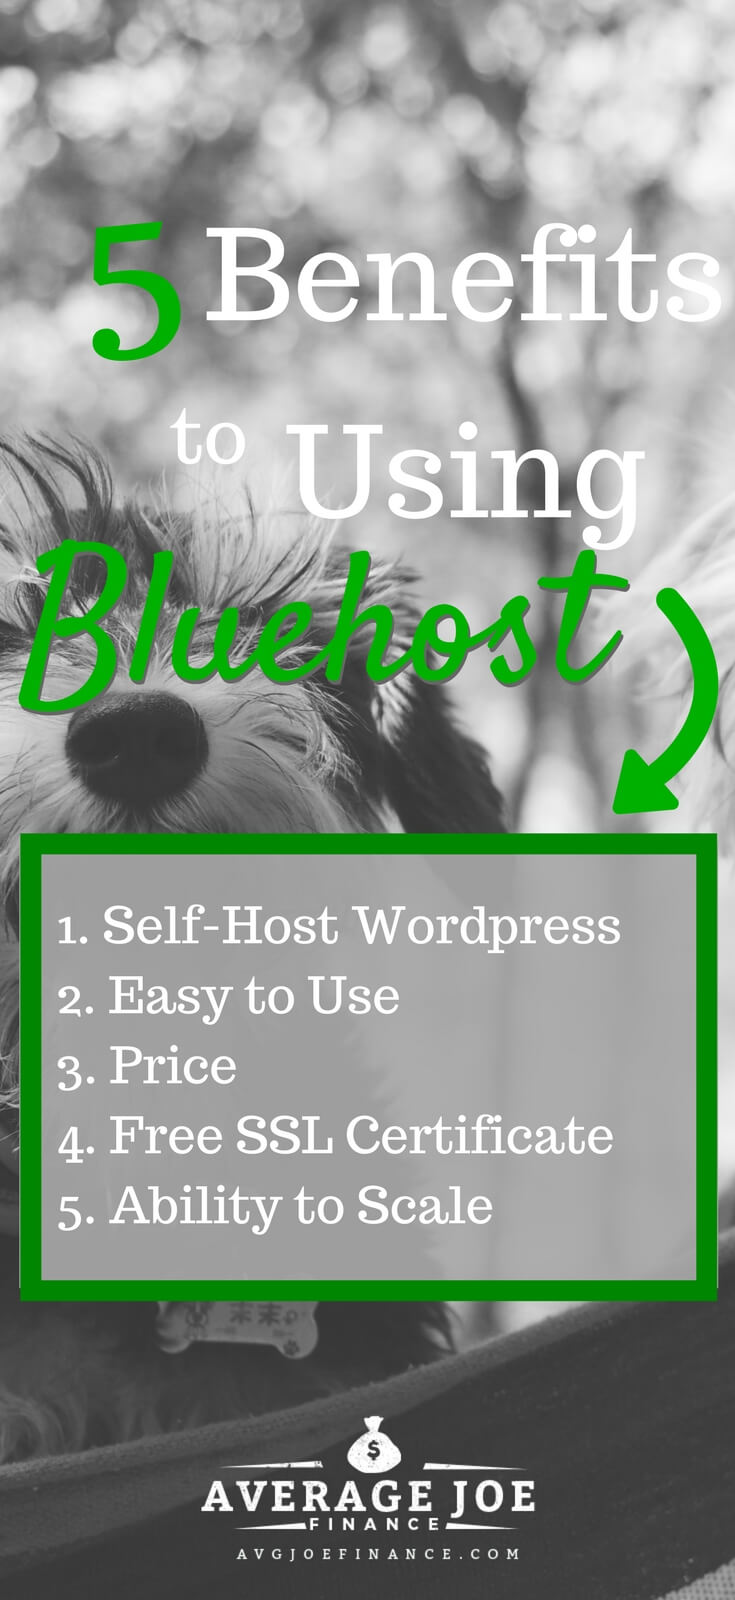 5 reasons to choose bluehost as your hosting provider